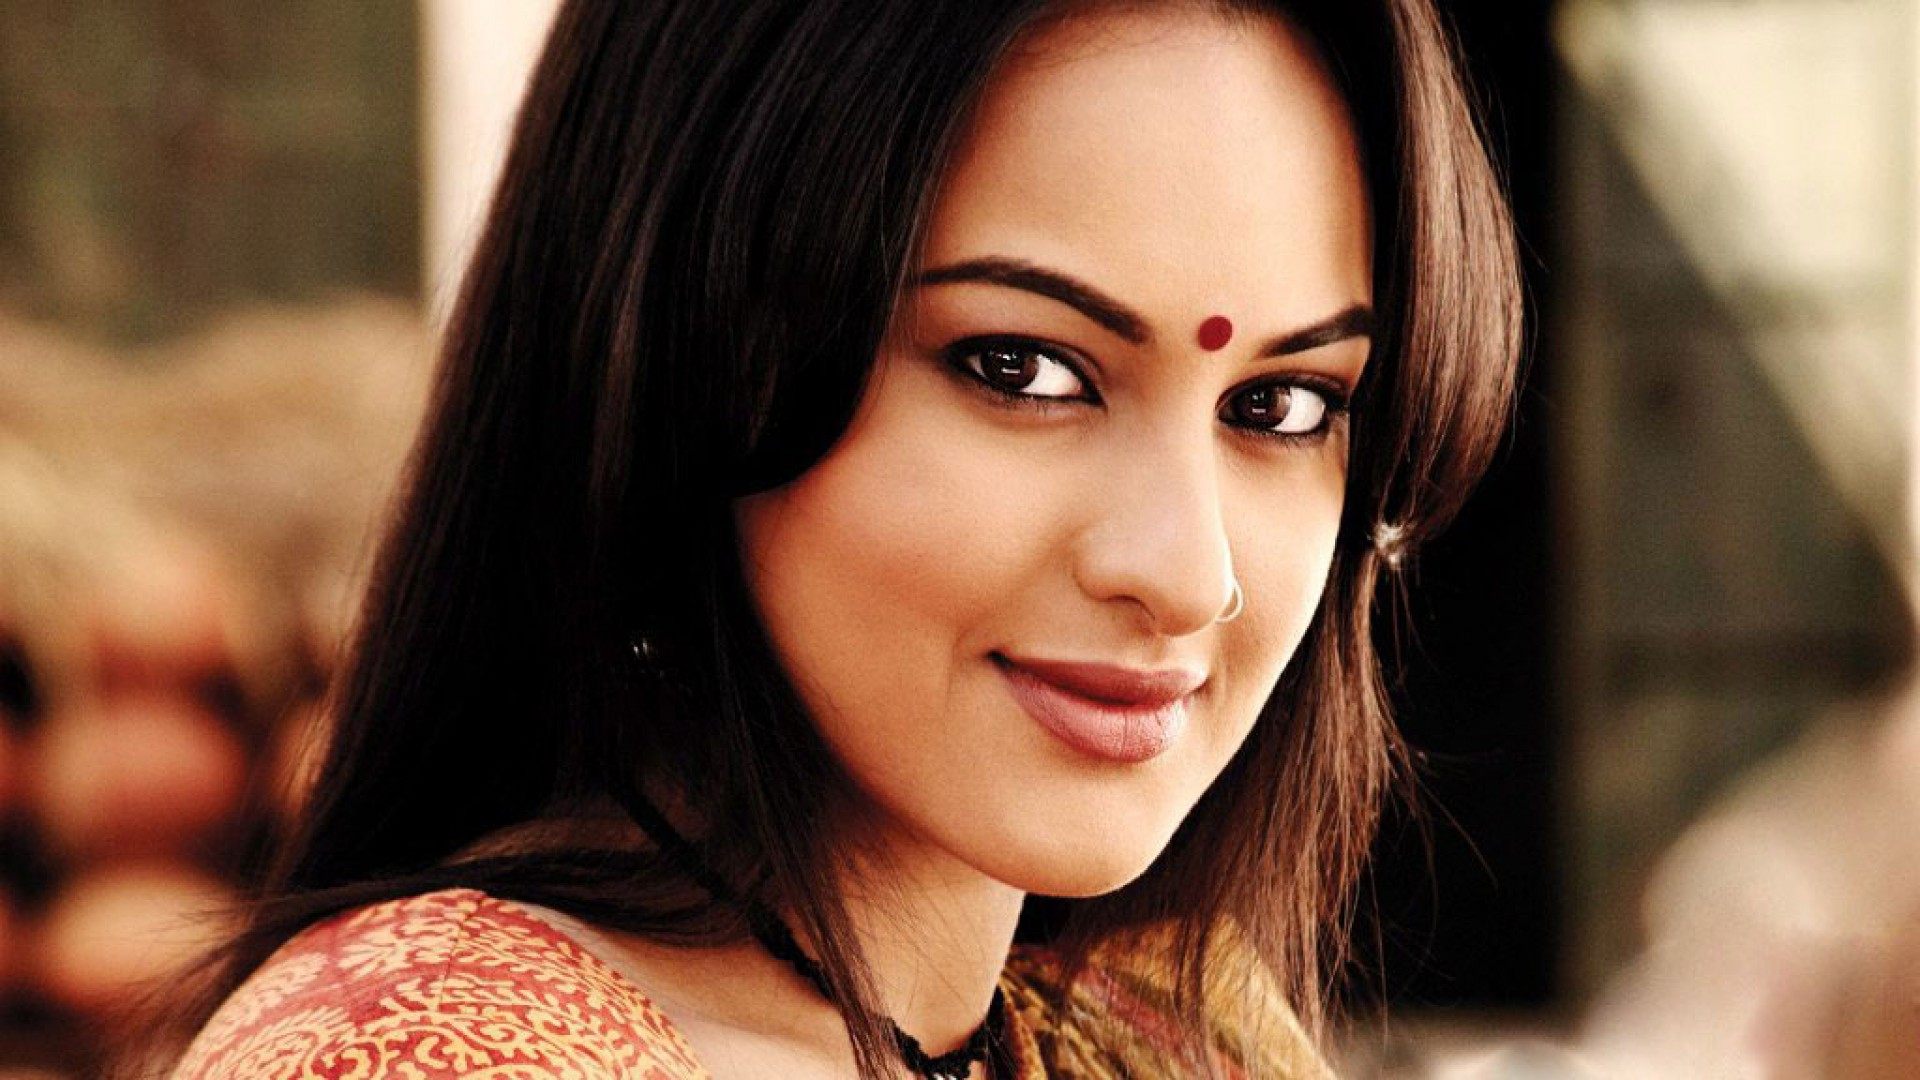 sonakshi sinha wallpapers full size,hair,face,eyebrow,hairstyle,beauty